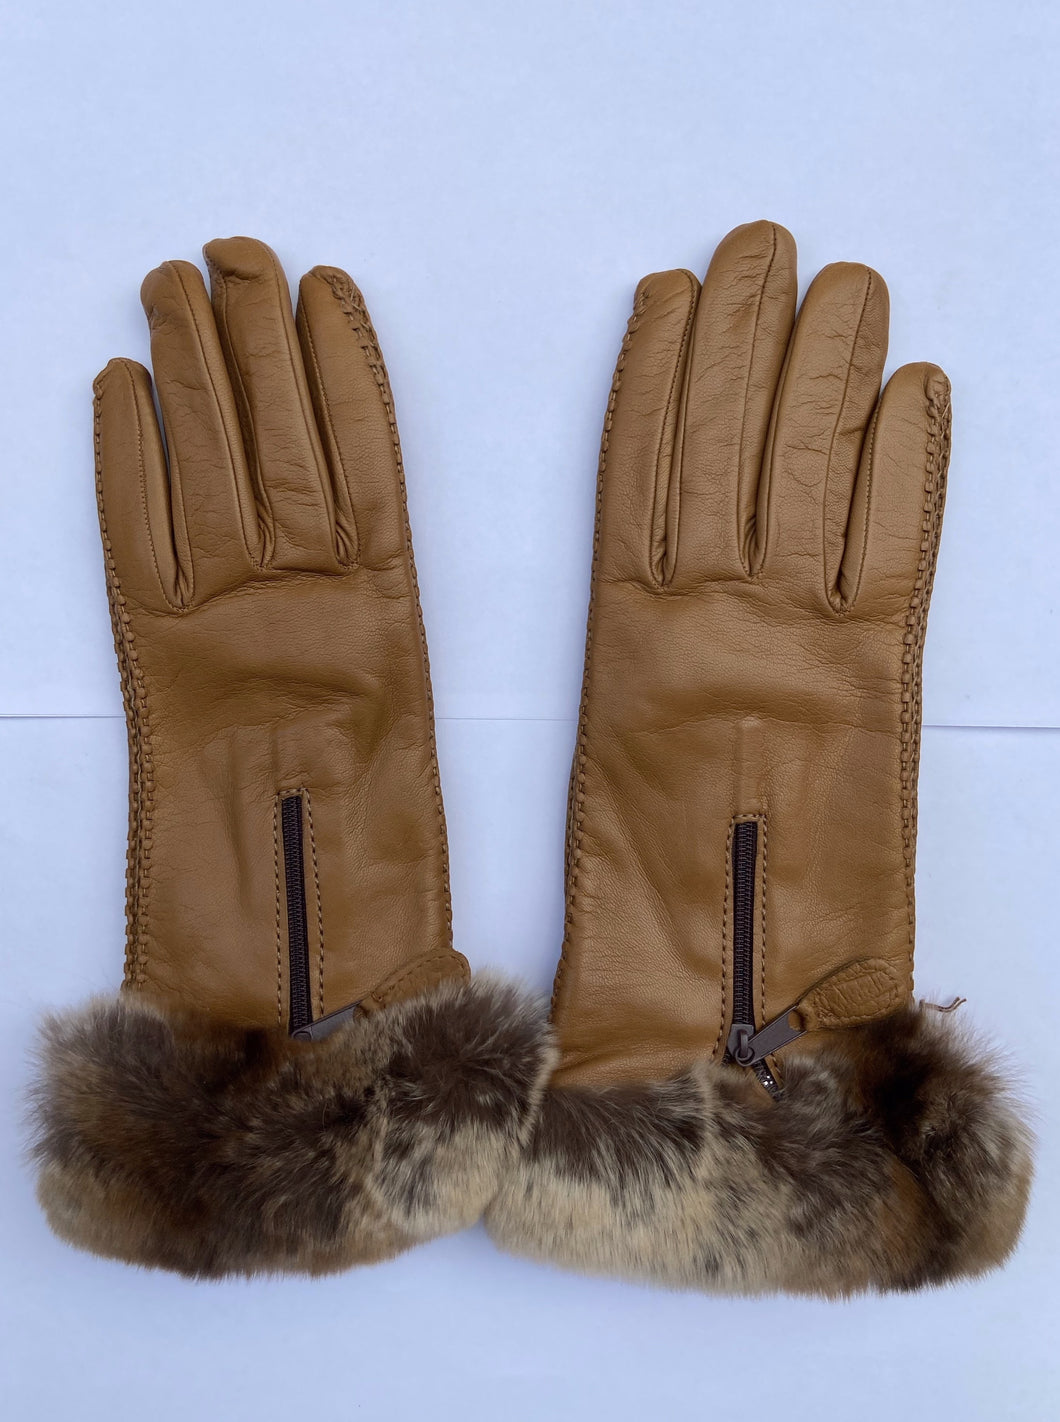 Real Leather Camel Gloves with Cashmere Lining and Rabbit Cuffs